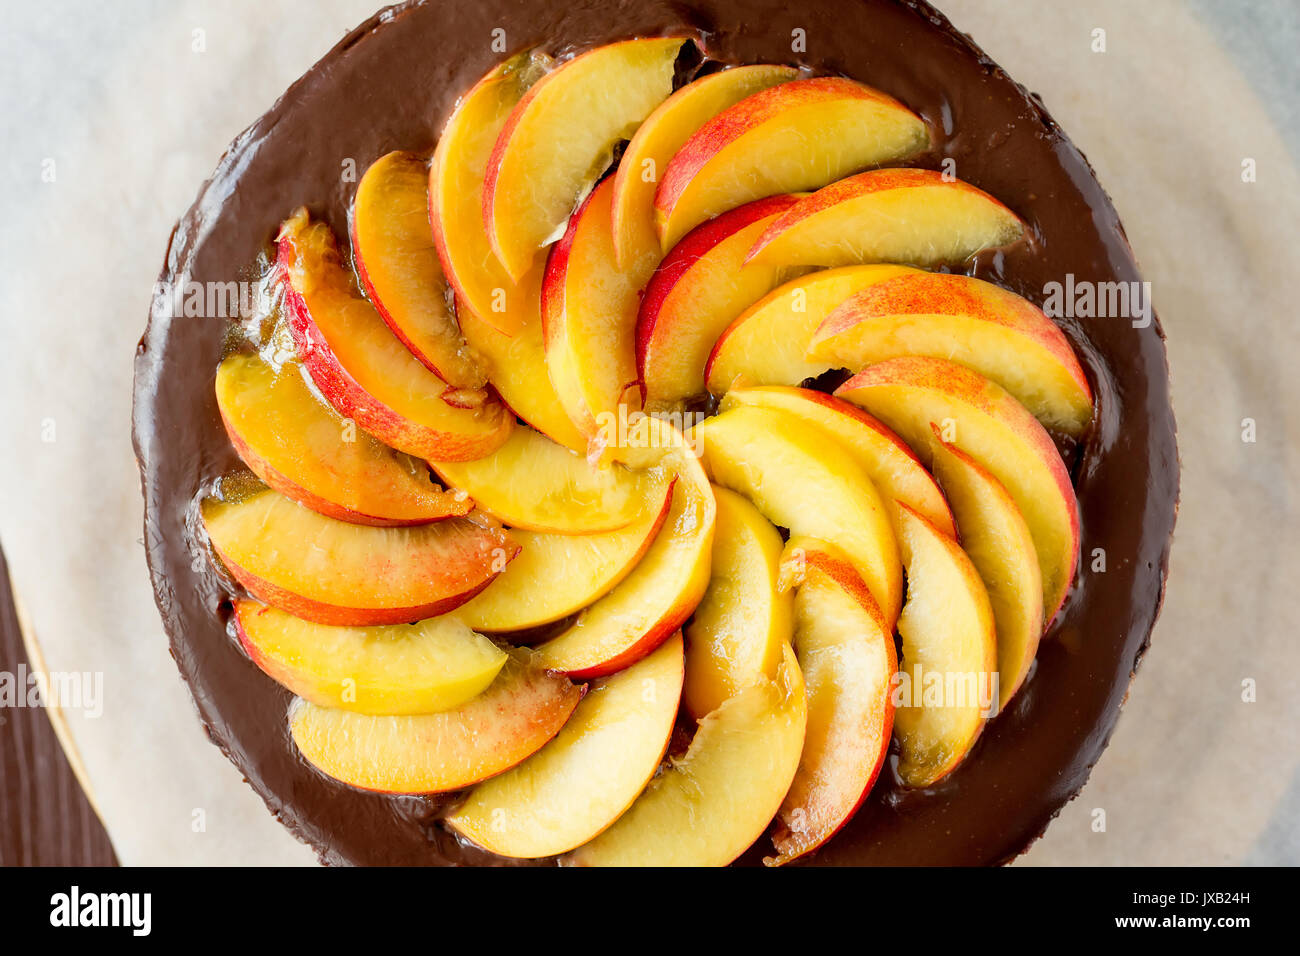 Chocolate cake with nectarines on cooking sheet selective focus top view Stock Photo